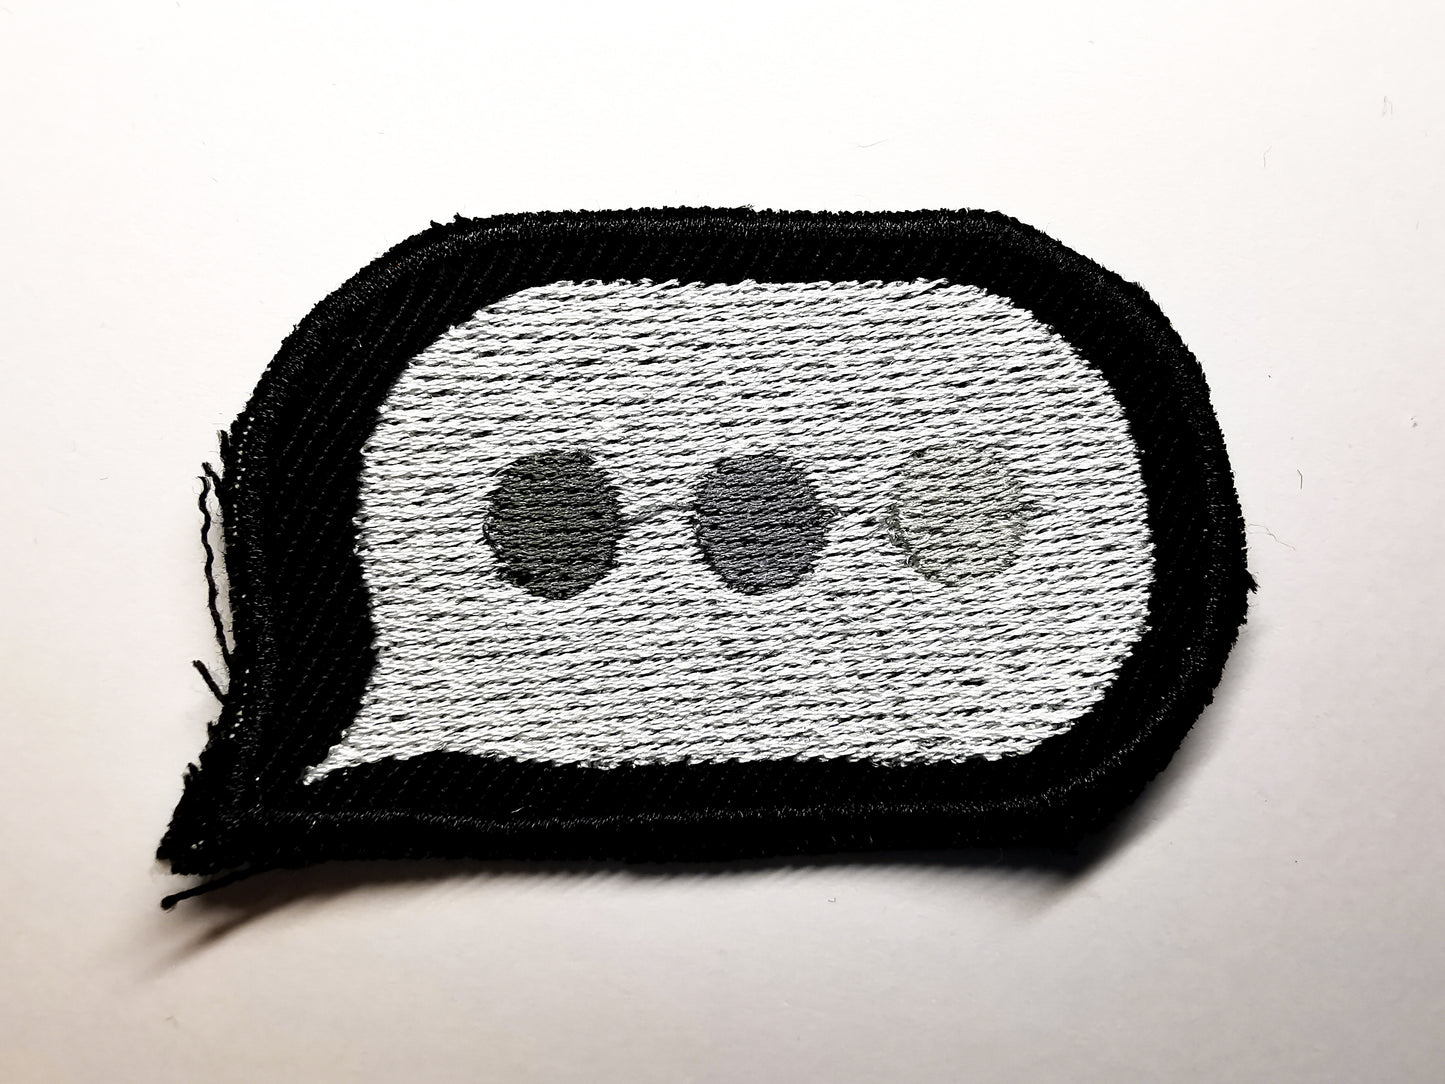 Chat bubbles Embroidered Patch typing social media gift present tech